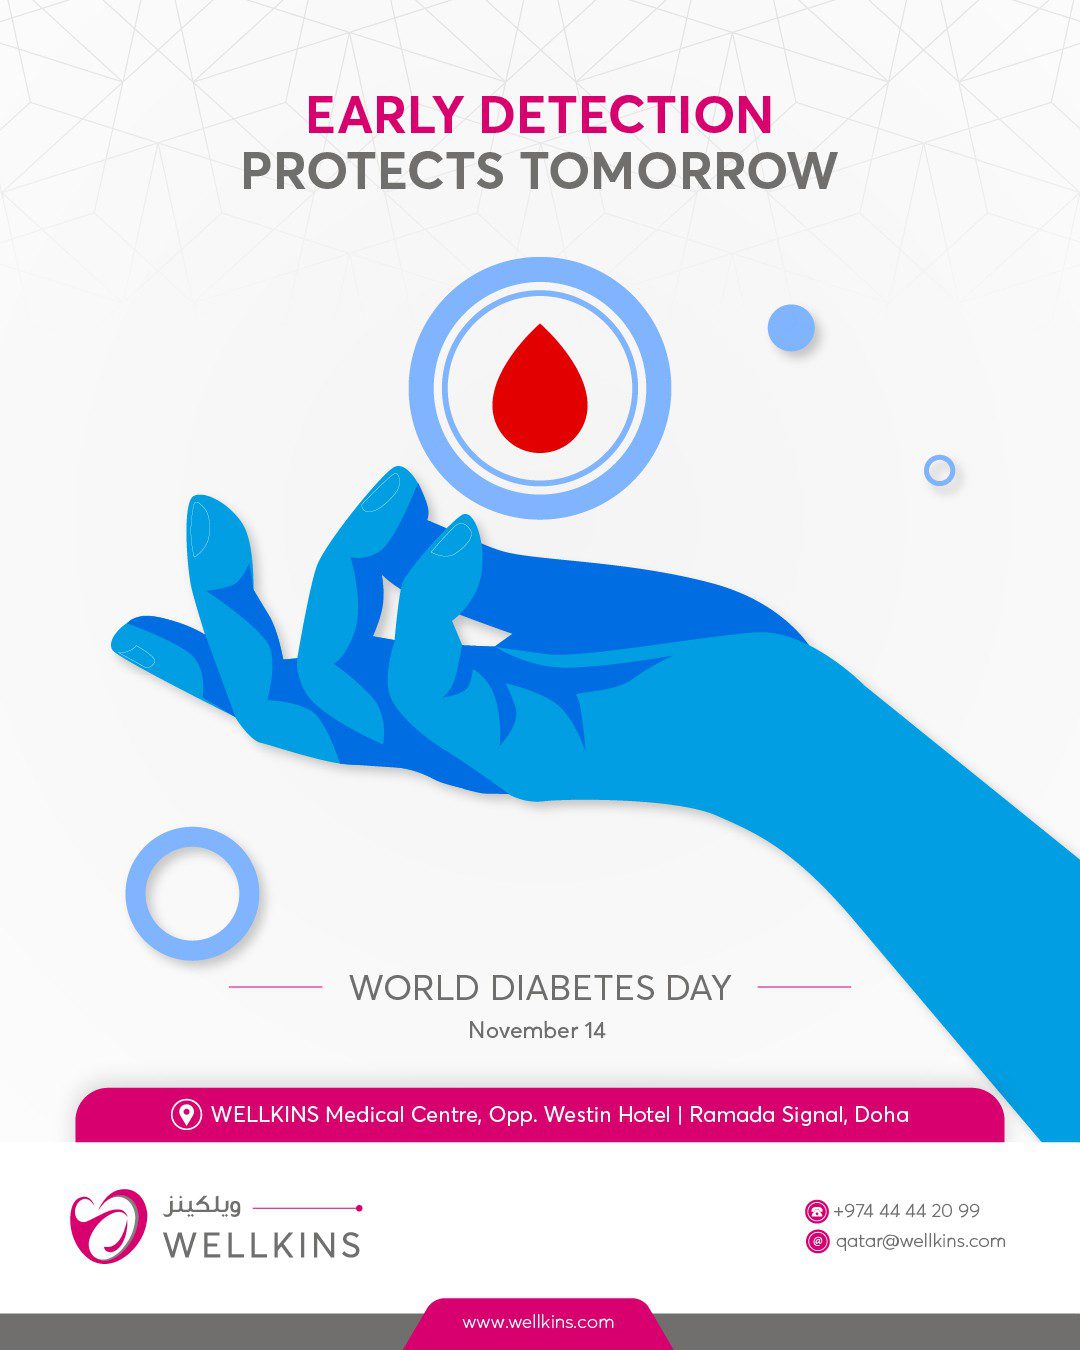 Early detection protects tomorrow.#WorldDiabetesDay
Let's create awareness and help reduce the risk of its life-threatening complications. It's time to ensure that people living with Diabetes get the best access to care and education. This year’s theme is Access to diabetes care which aims to highlight the importance of the prevention of diabetes.
.
.
.
_______________________________
To learn more about #WELLKINSQATAR and our services, kindly visit our website www.wellkins.com
Helpline: 4444 2099
_______________________________
#Wellkinsqatar #wellkins #medicalcentre #Qatar2022